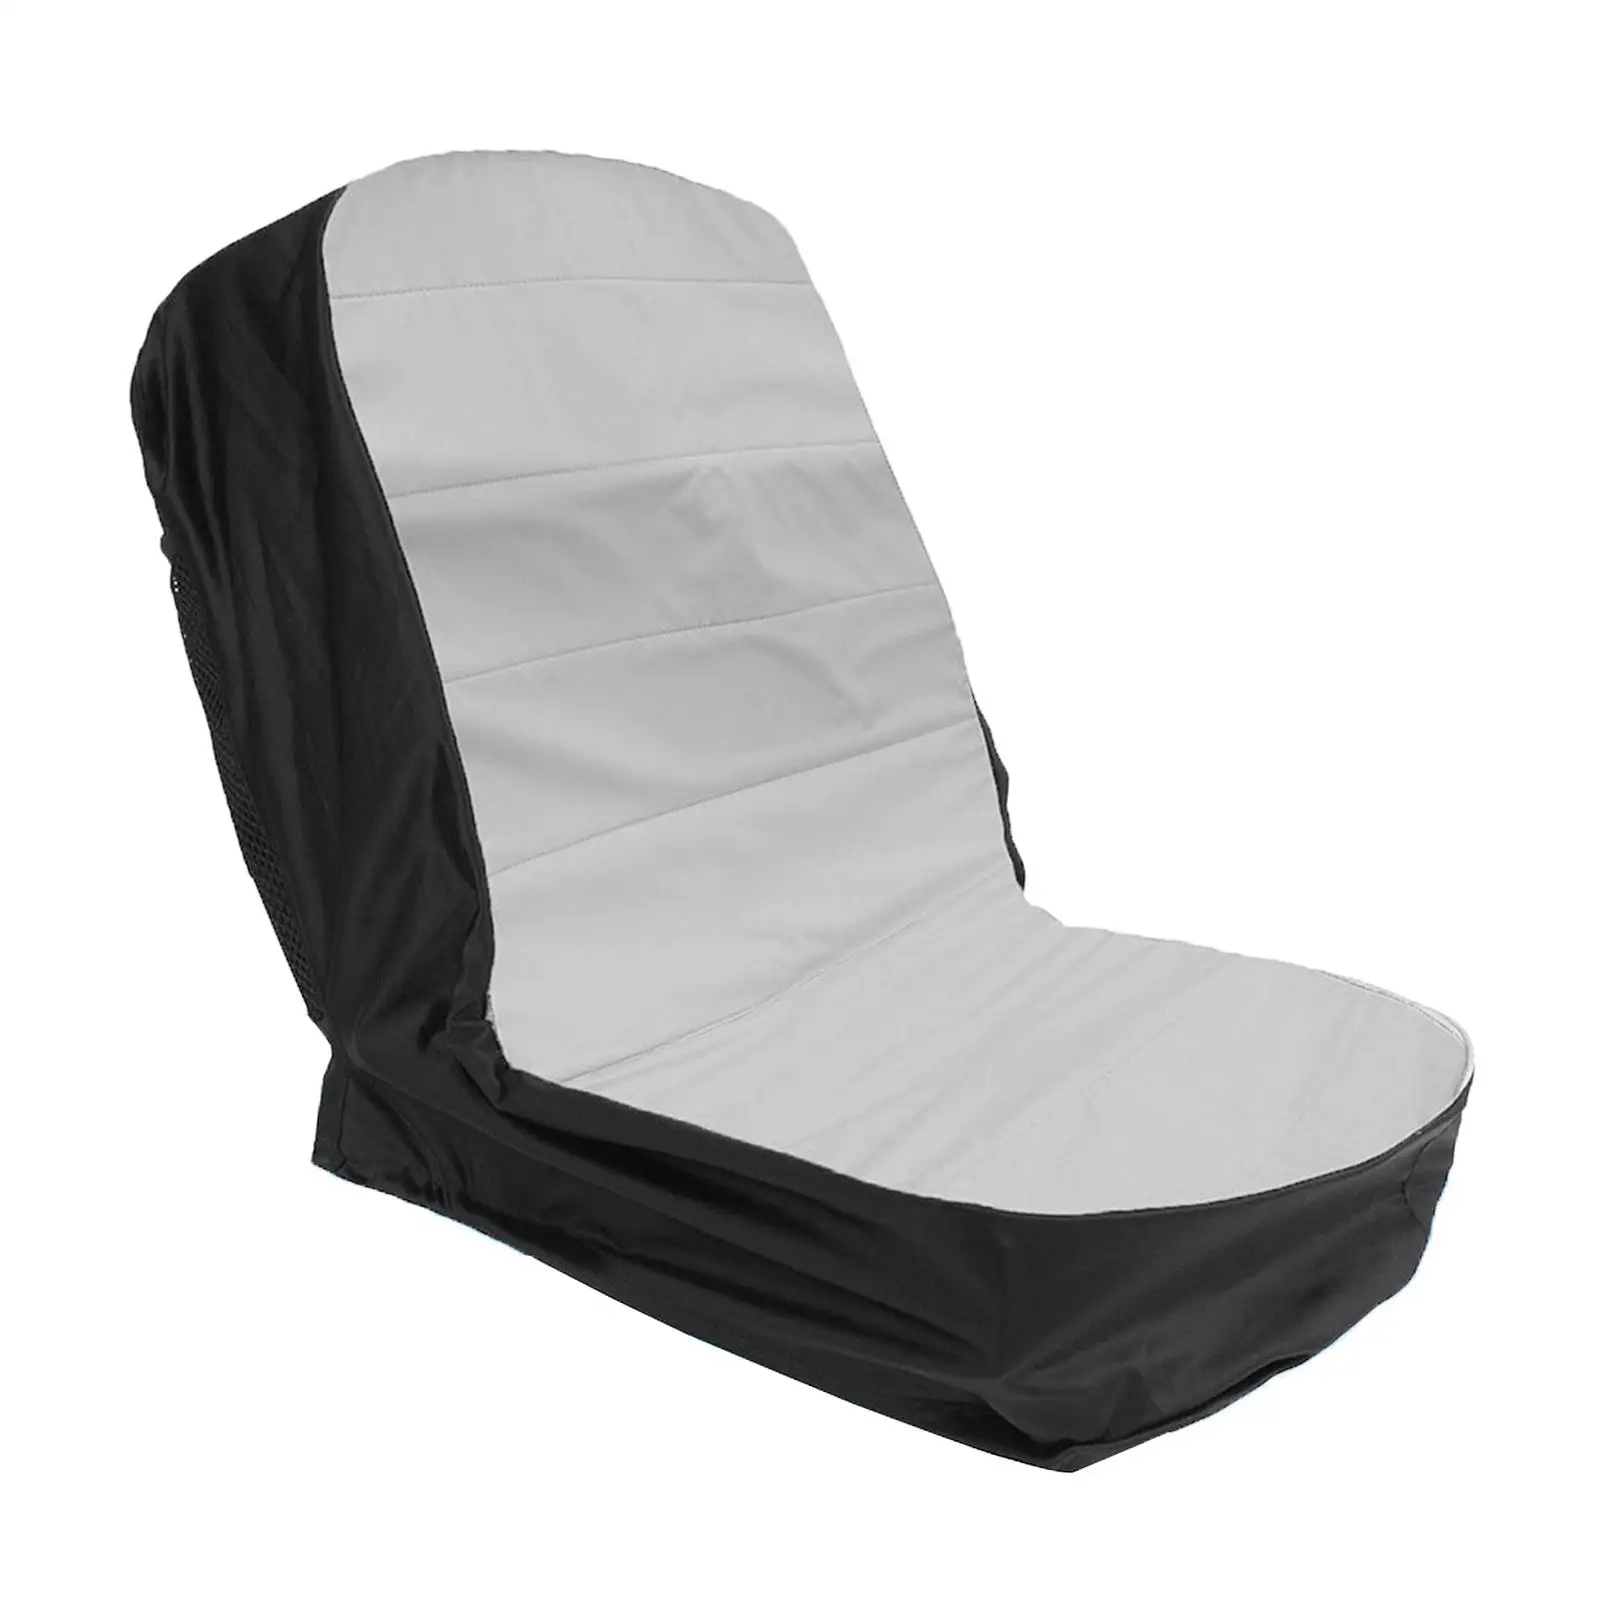 Tractor Heavy Duty Seat Cover Riding Seat Cover ,,,Universal Tractor Cover